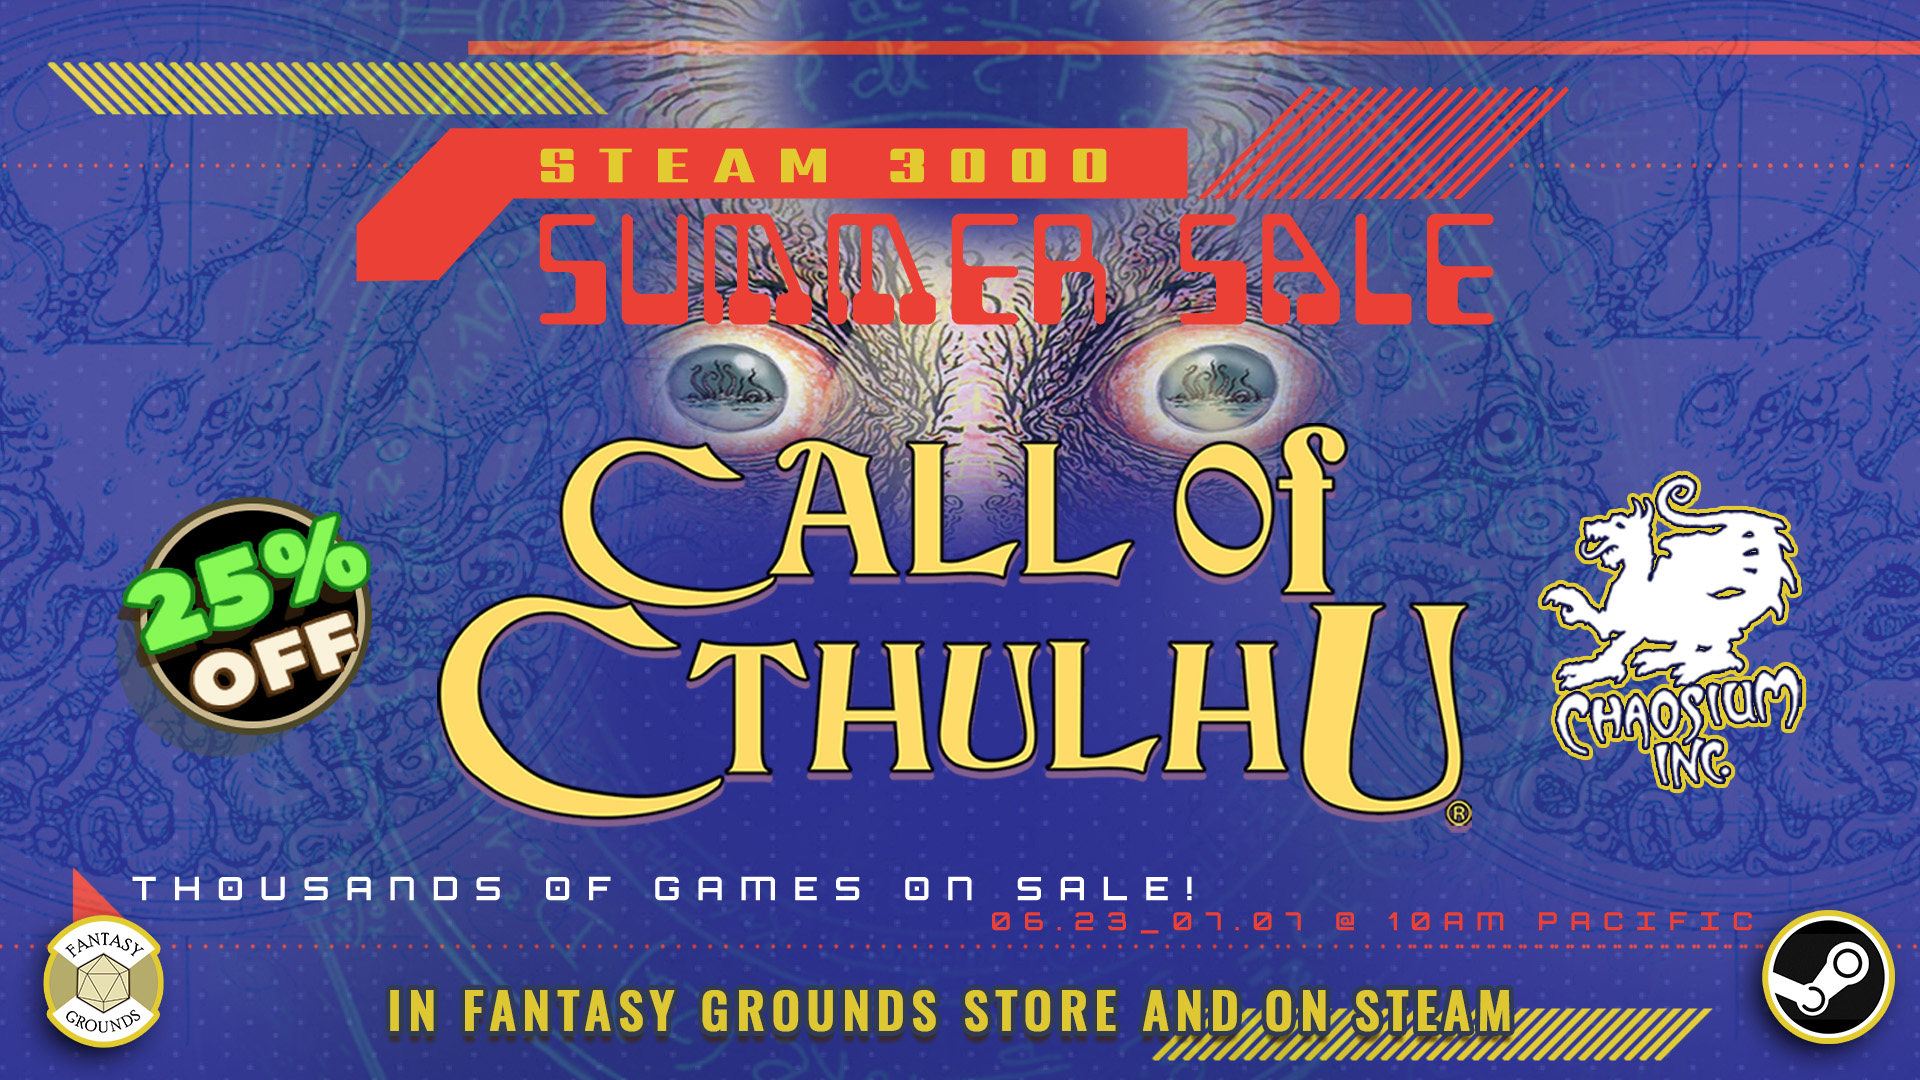 Fantasy Grounds Steam Summer Sale - Call of Cthulhu